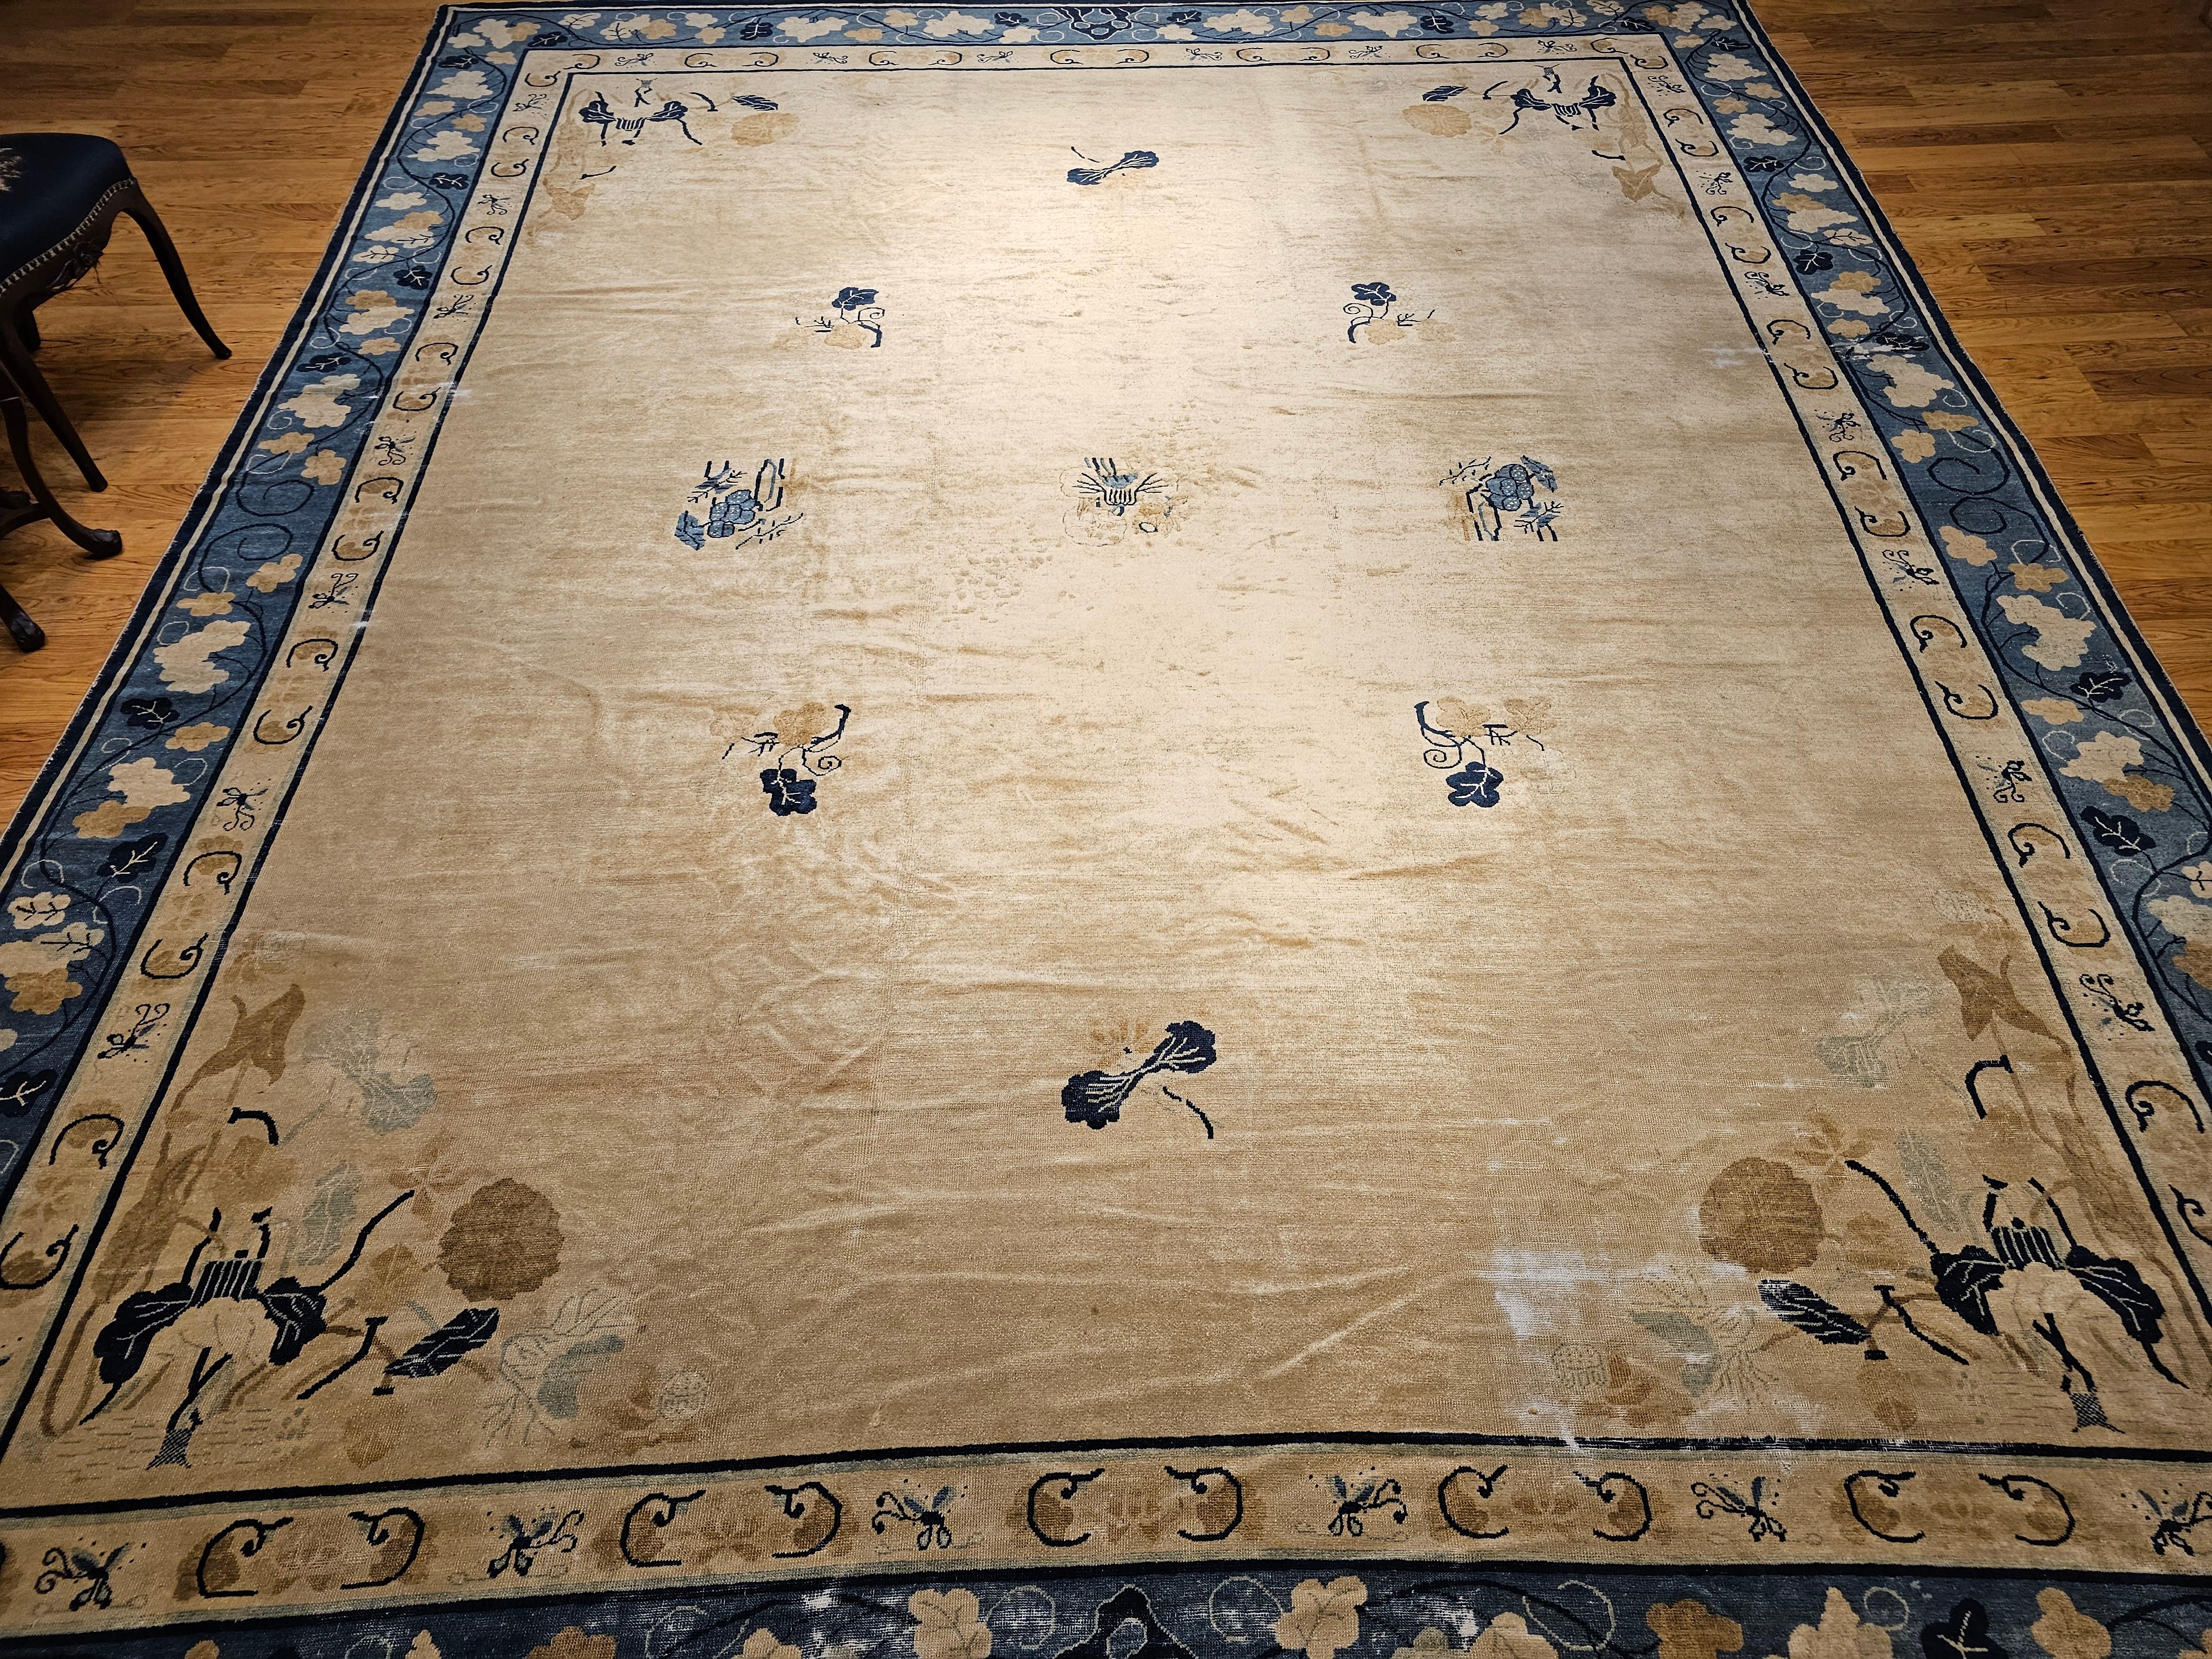 19th Century Oversized Chinese Peking Rug in Wheat, Navy, Brown, Green, Sky-Blue For Sale 9